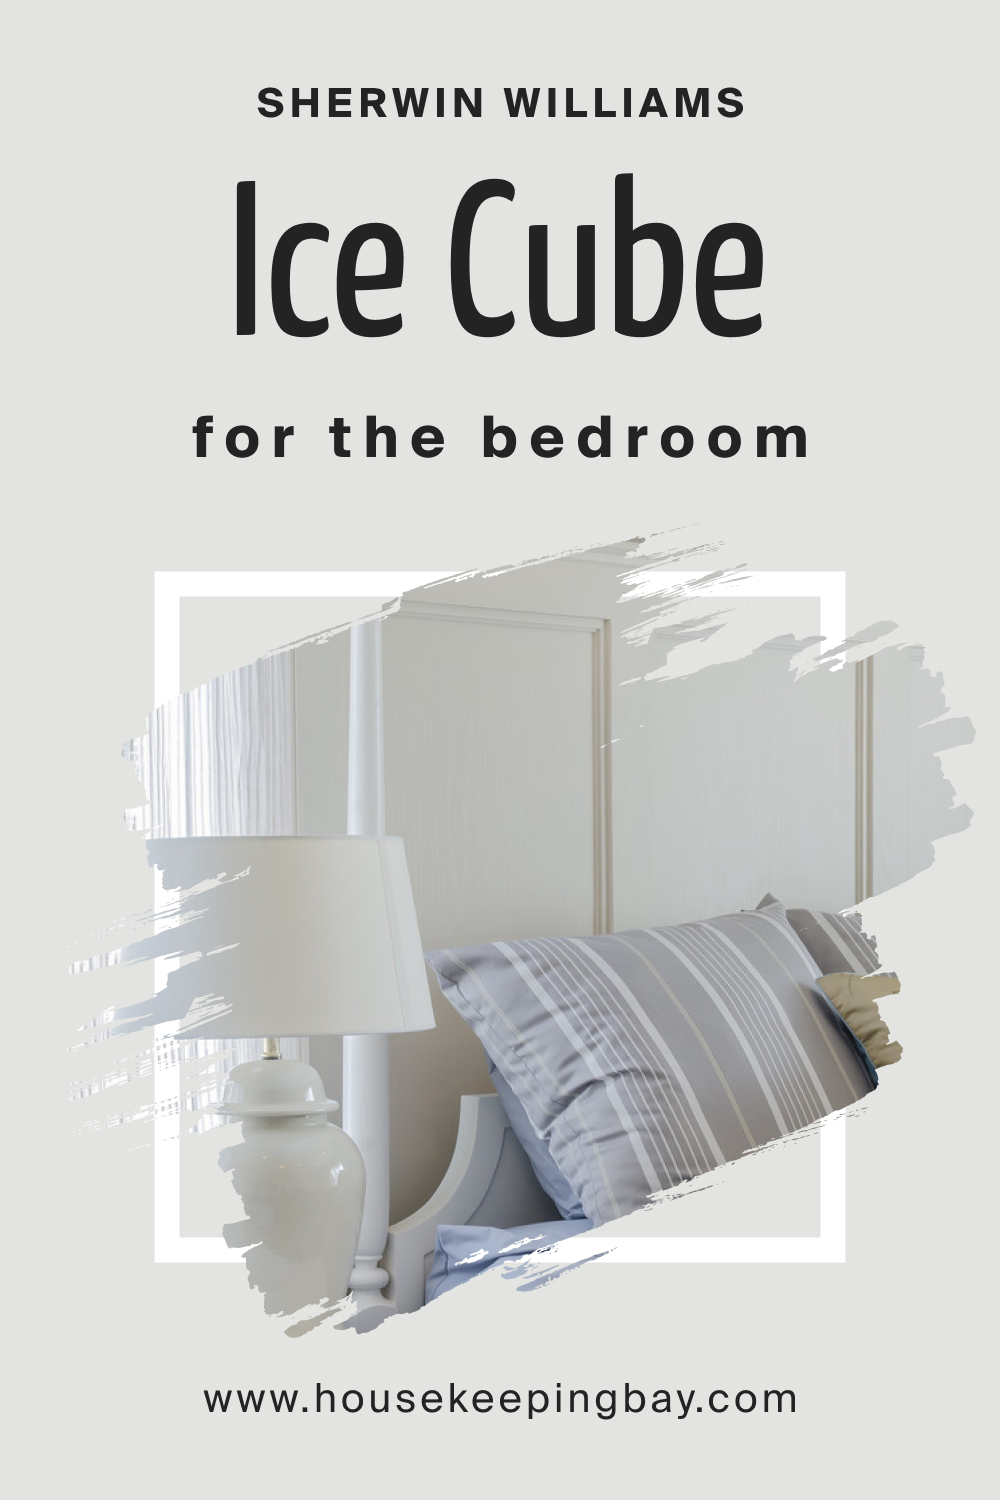 Sherwin Williams. SW 6252 Ice Cube For the bedroom